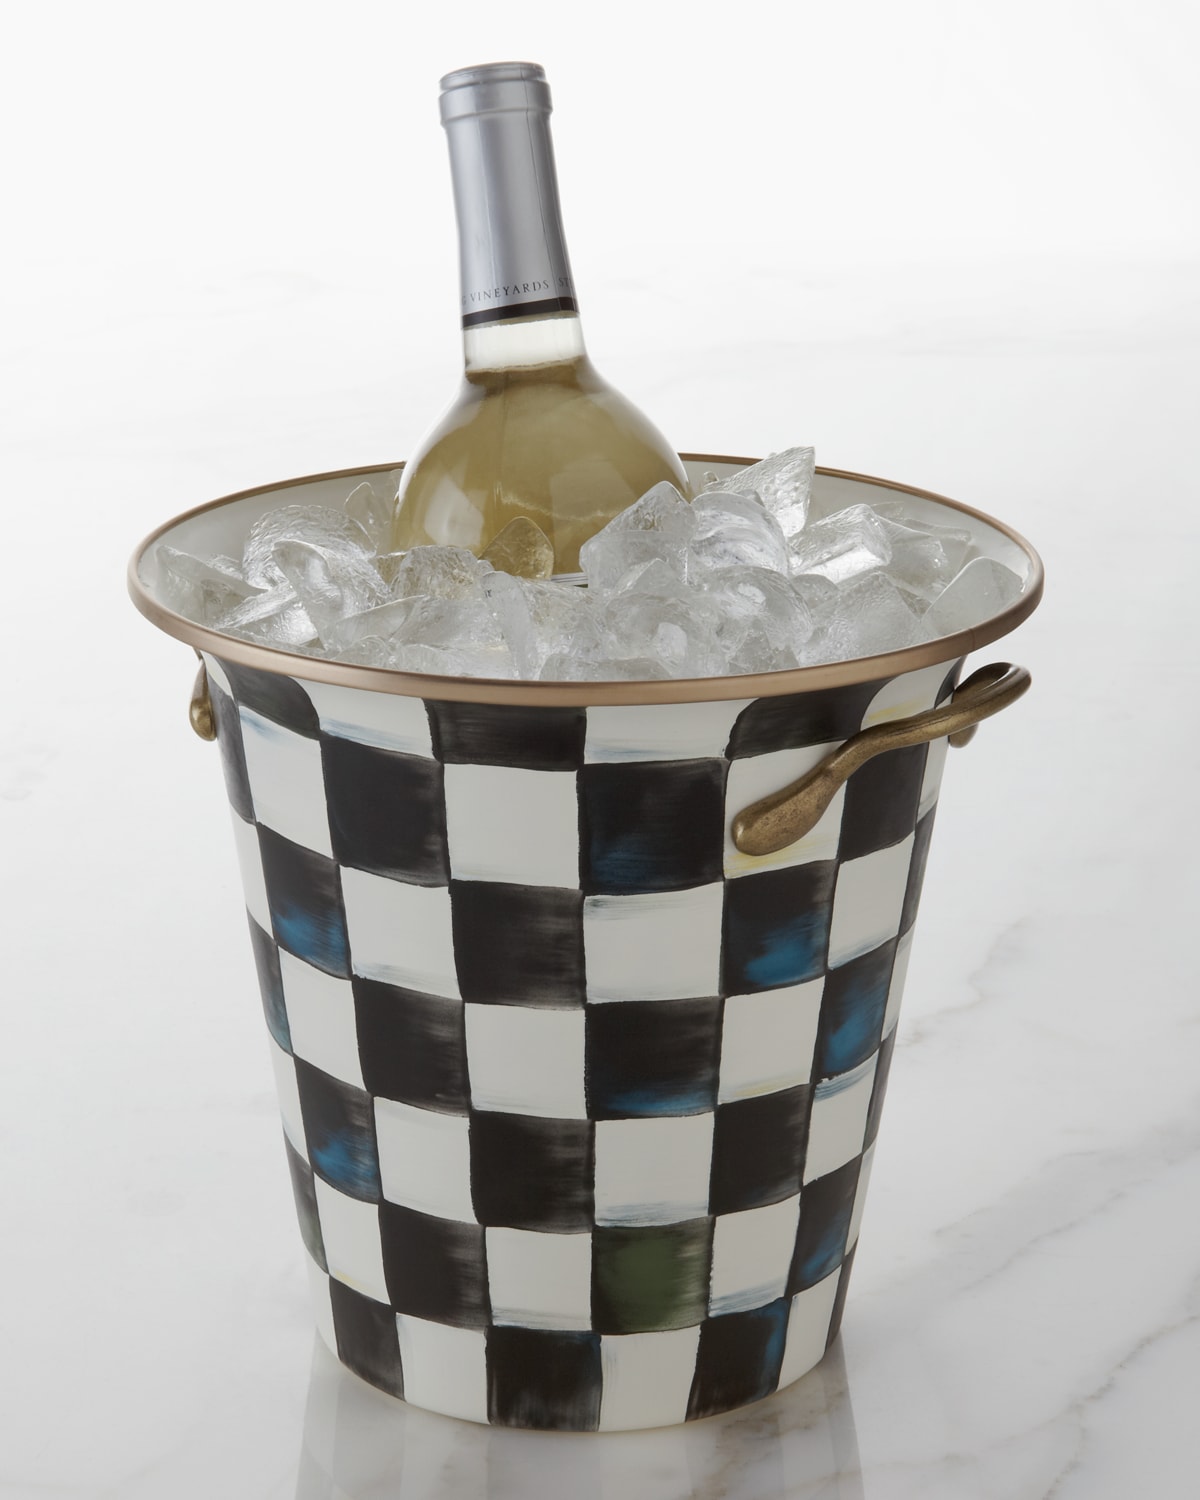 Mackenzie-childs Courtly Check Enamel Wine Cooler